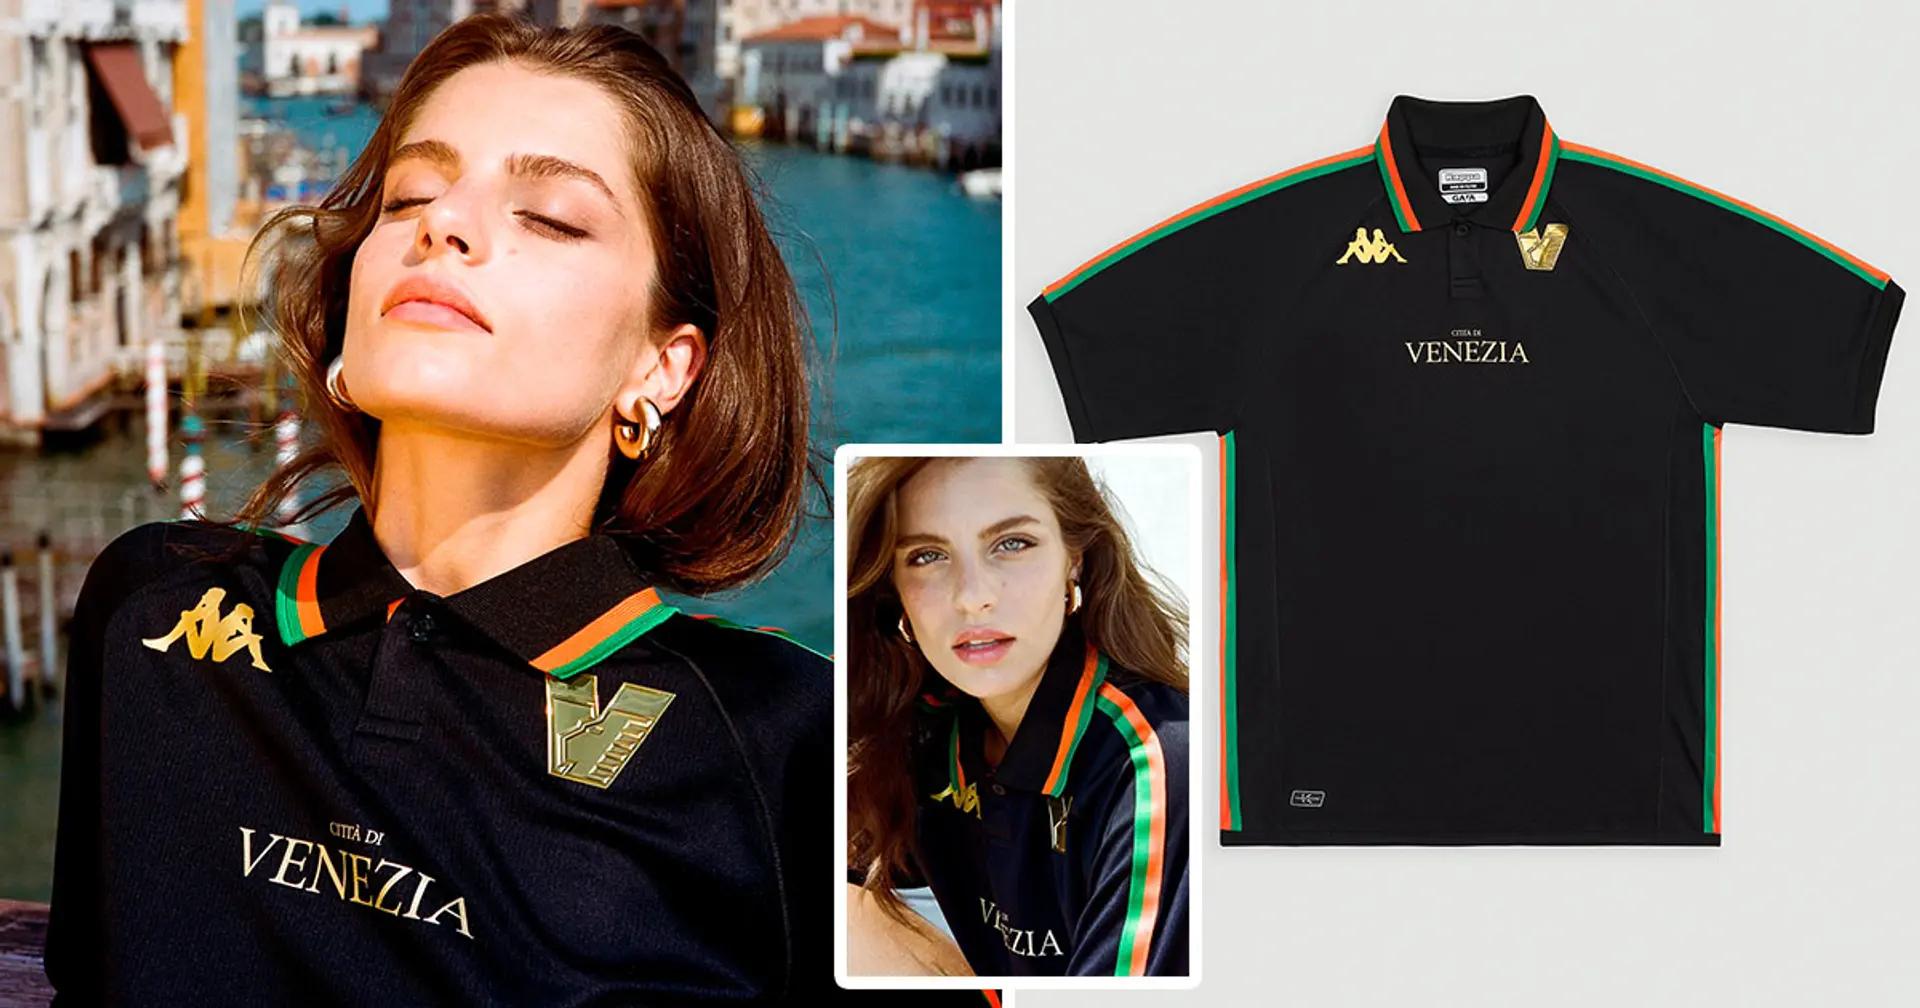 Venezia dropped their new kit for 2022/23 and it's stunning